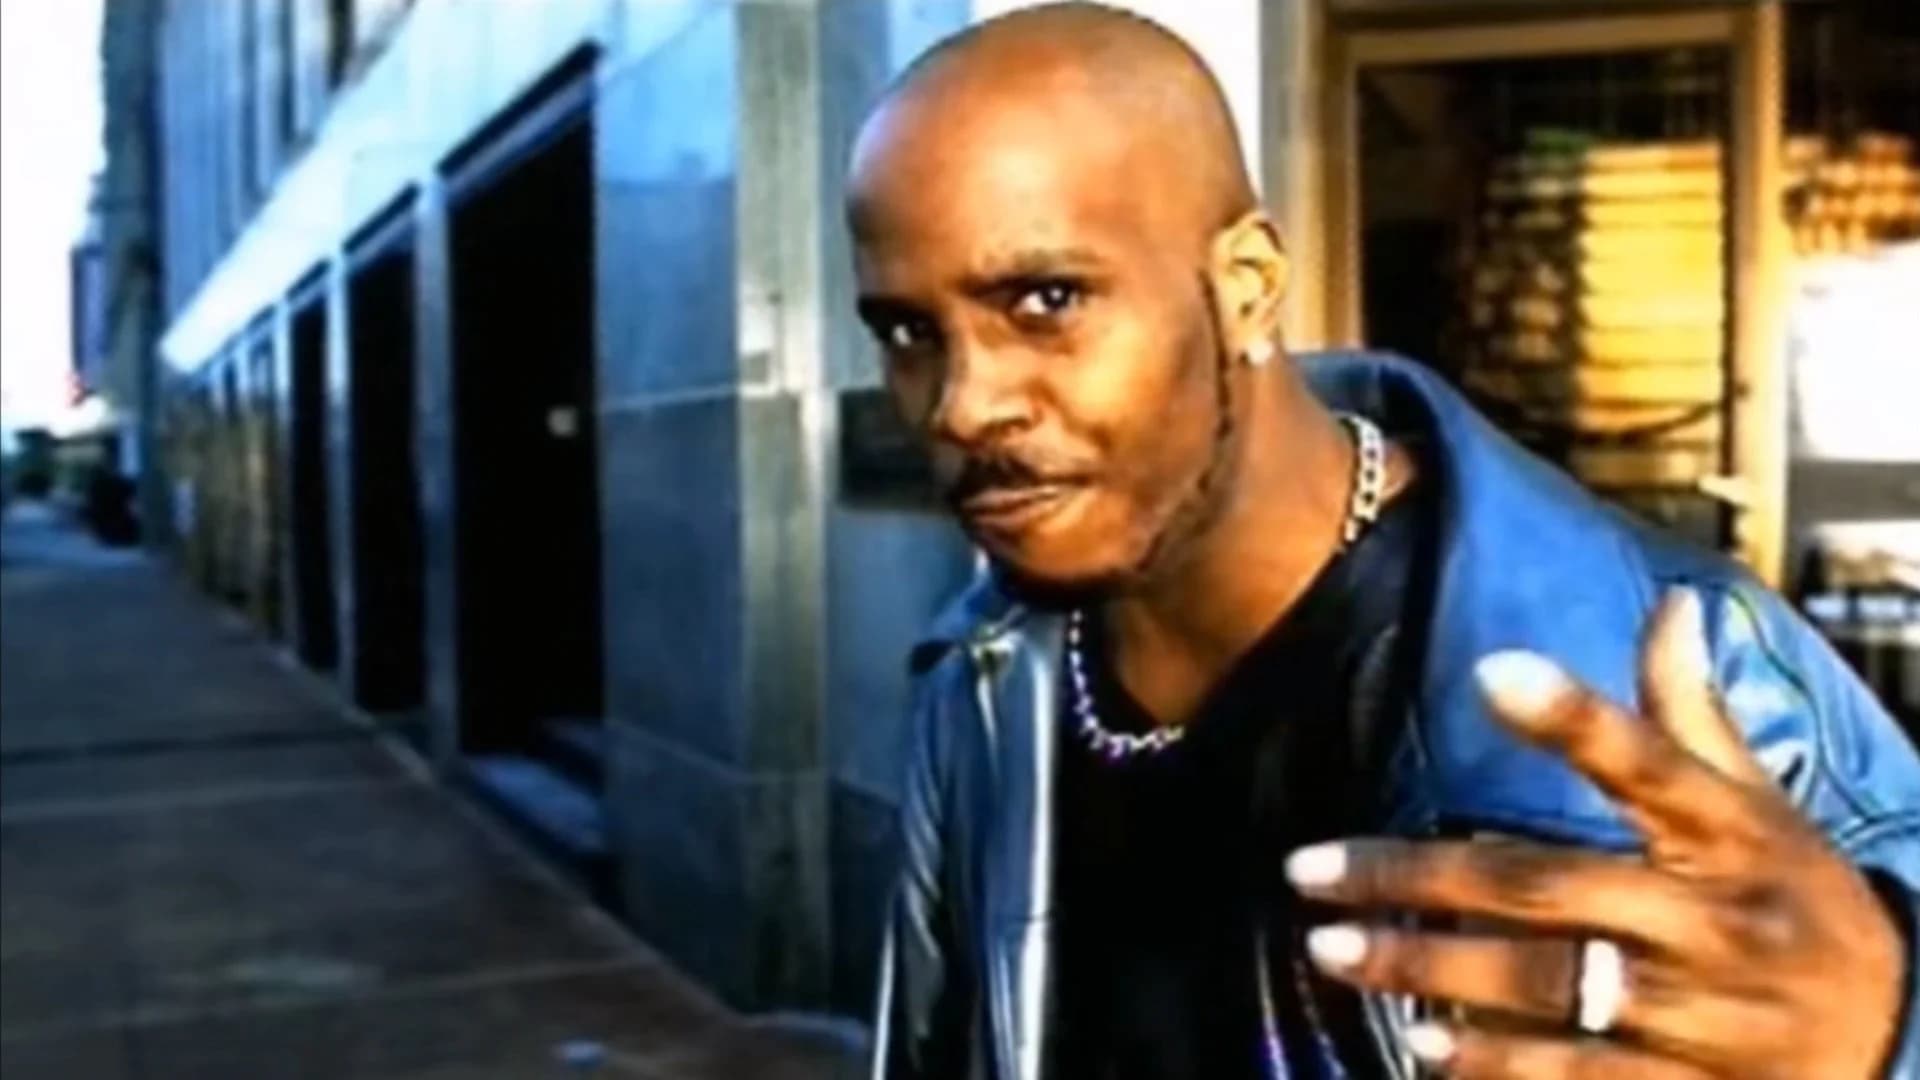 DMX faces the music: serenaded by judge, gets year in prison